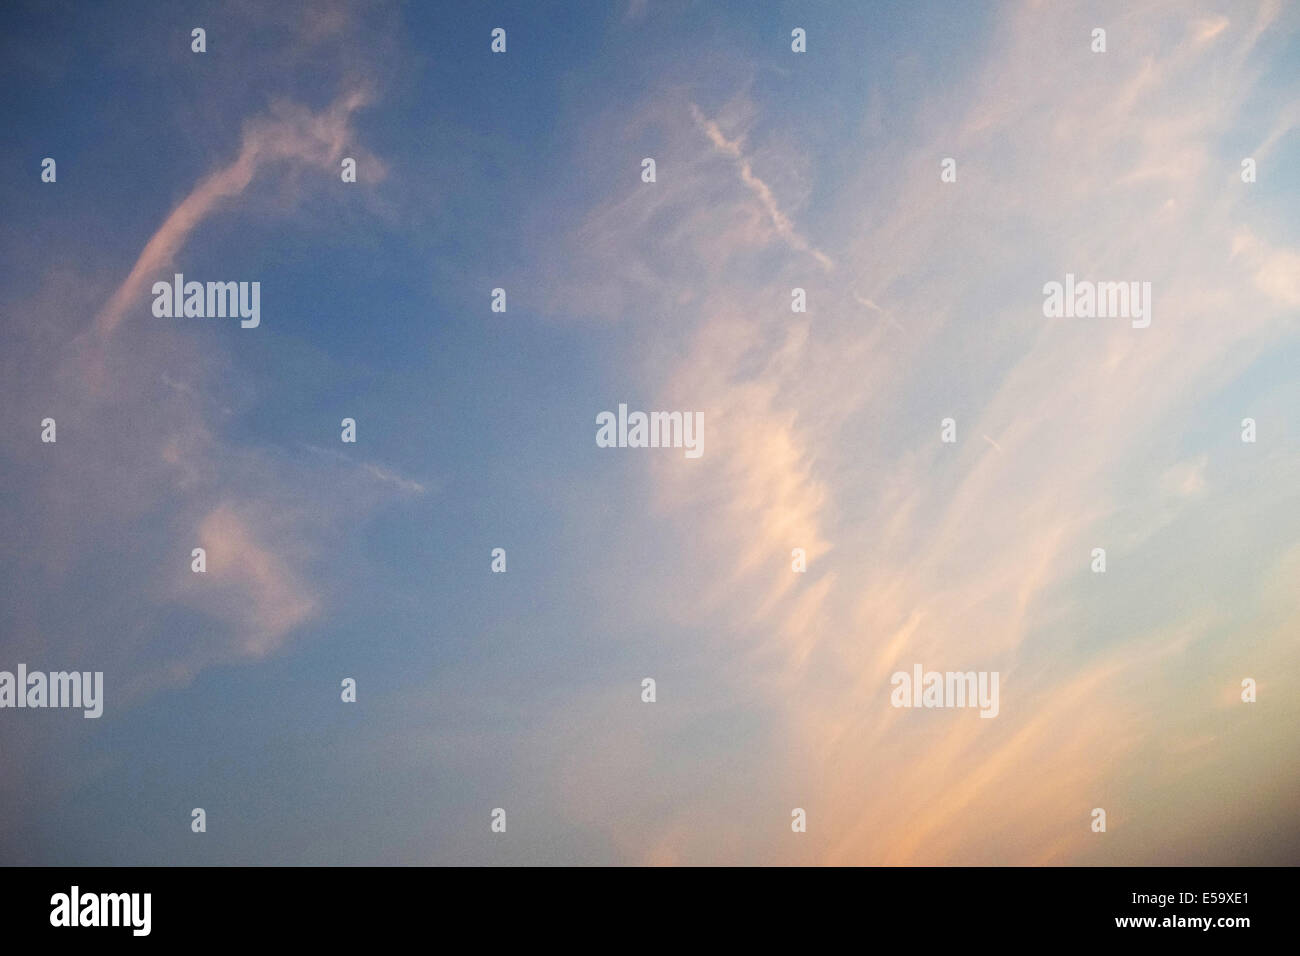 View of the summer evening sky with come lingering clouds Stock Photo